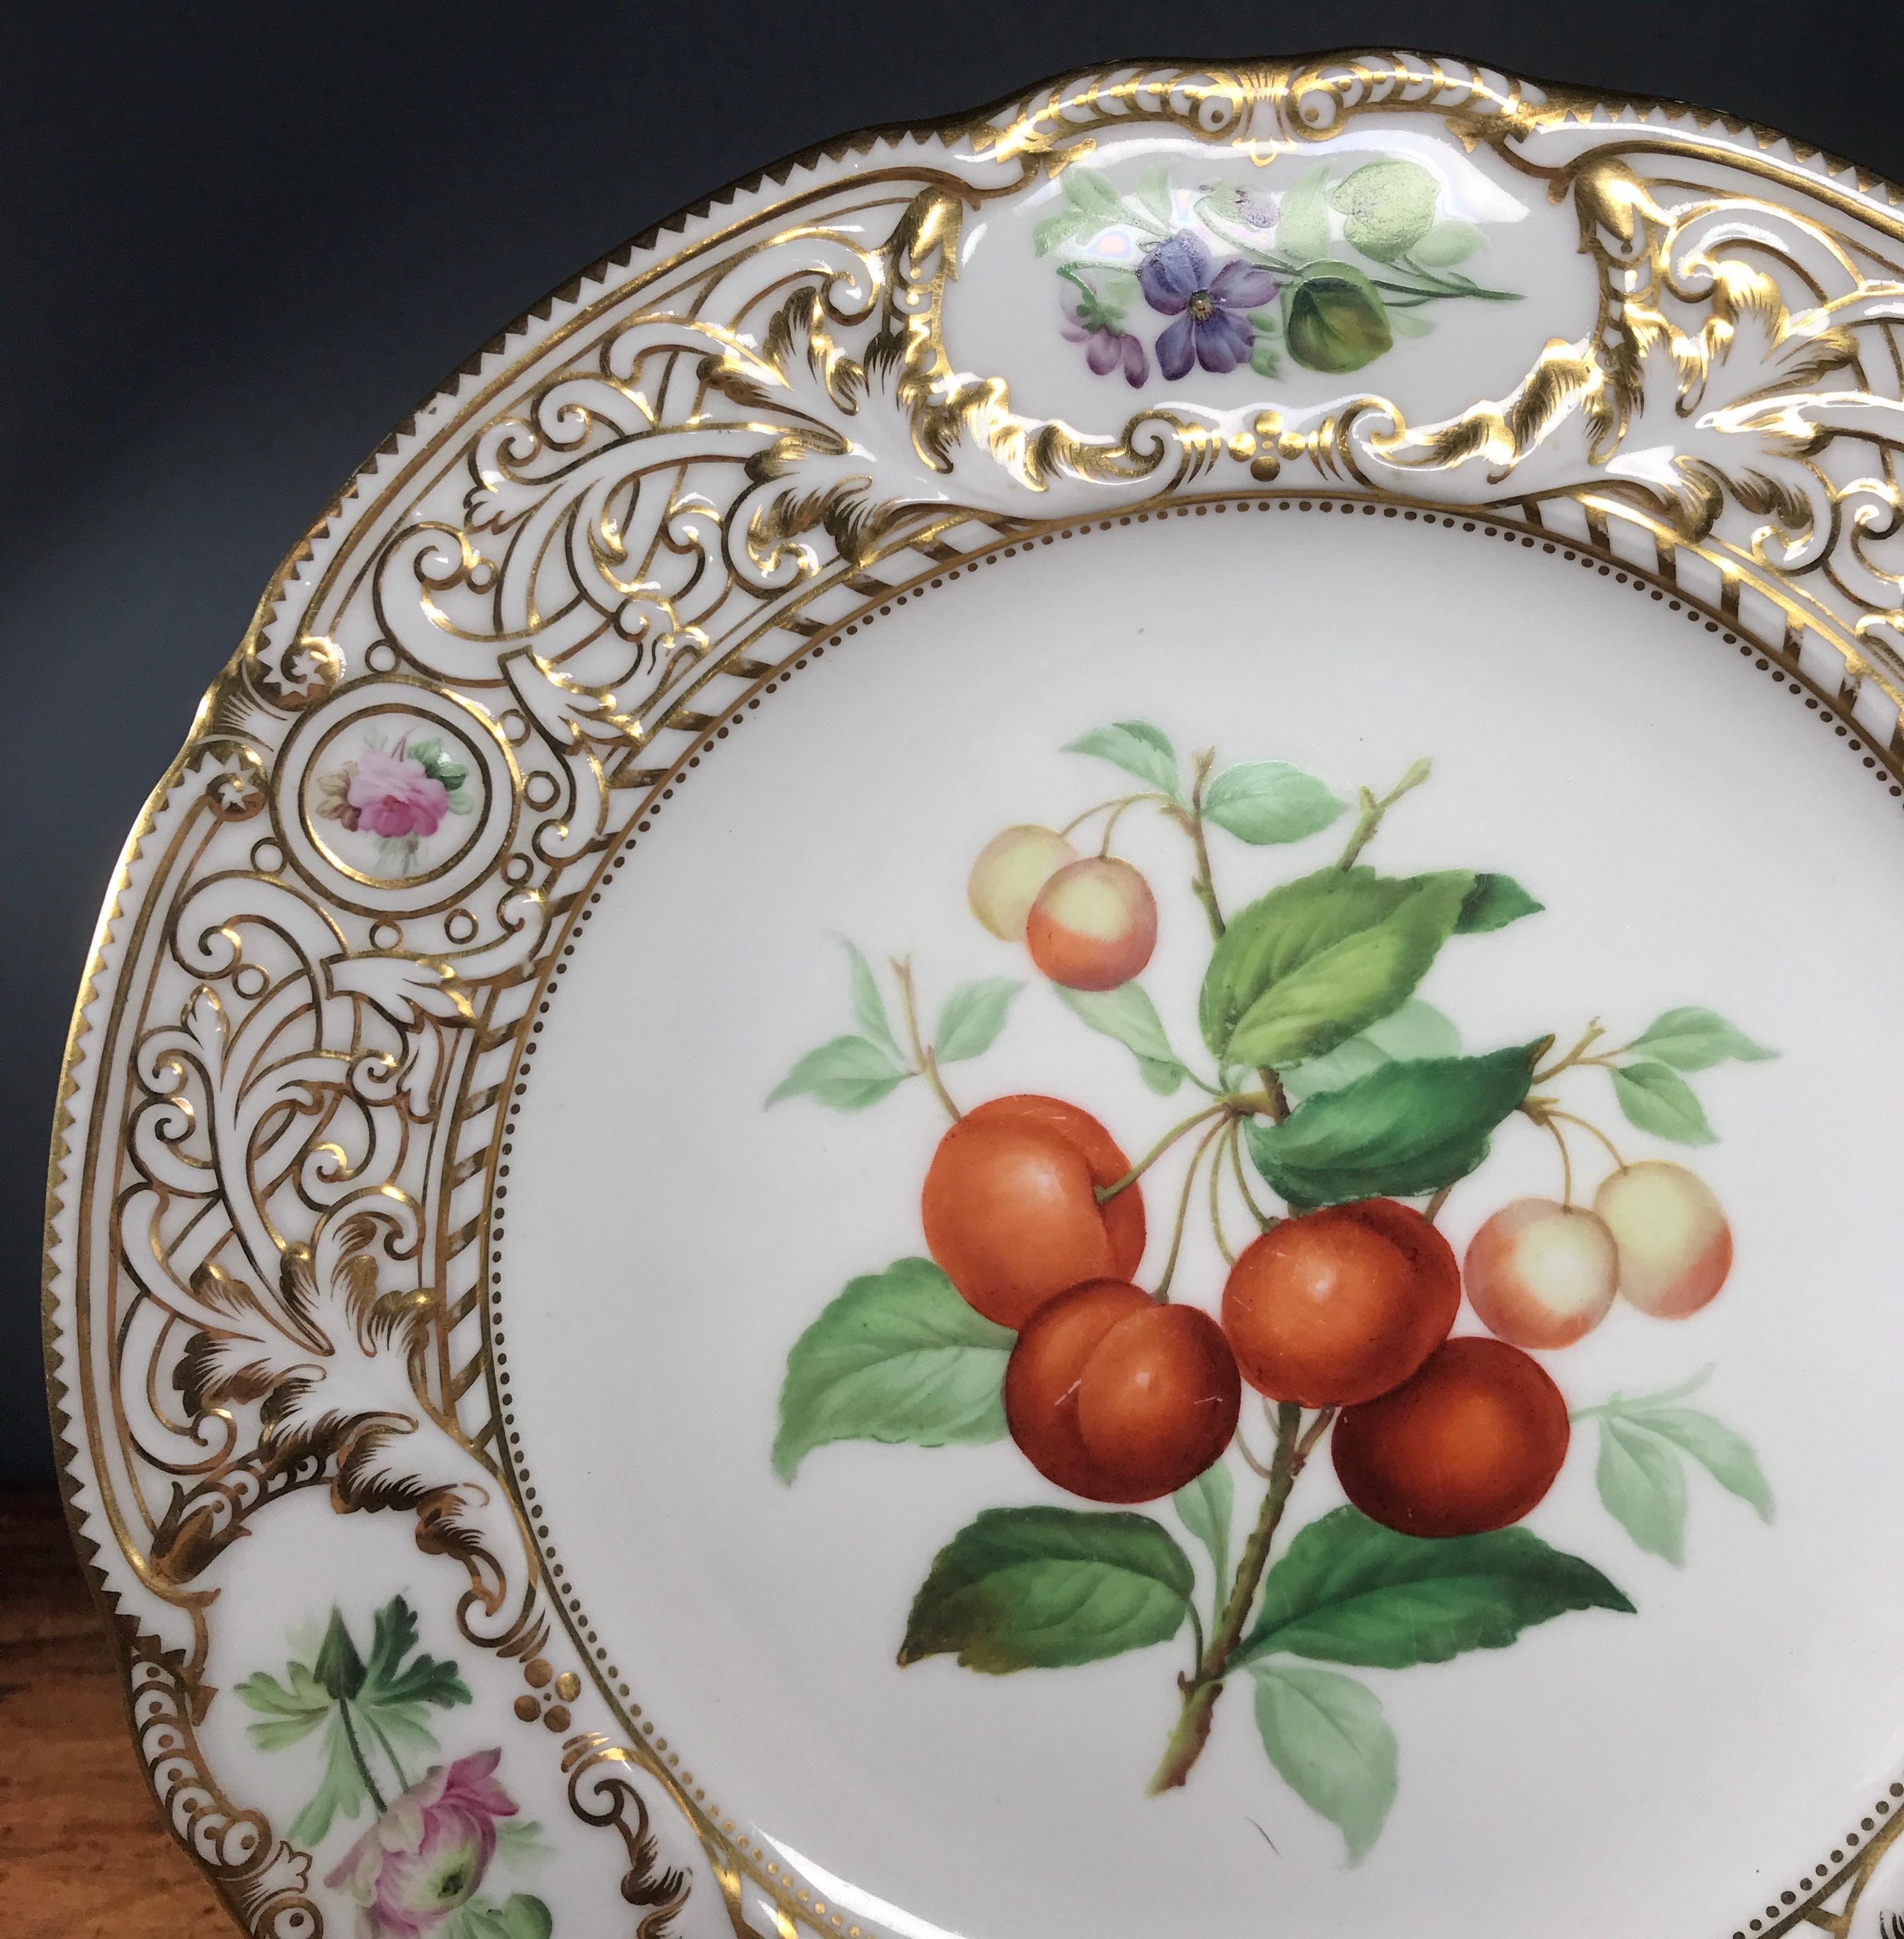 A fine Minton plate, the rim strap-work moulding picked out in rich gold, the center with a large specimen of cherries, with further flower specimens in the reserves on the border, titled to the back 'Cherries'. 

Impressed date code for 1852.